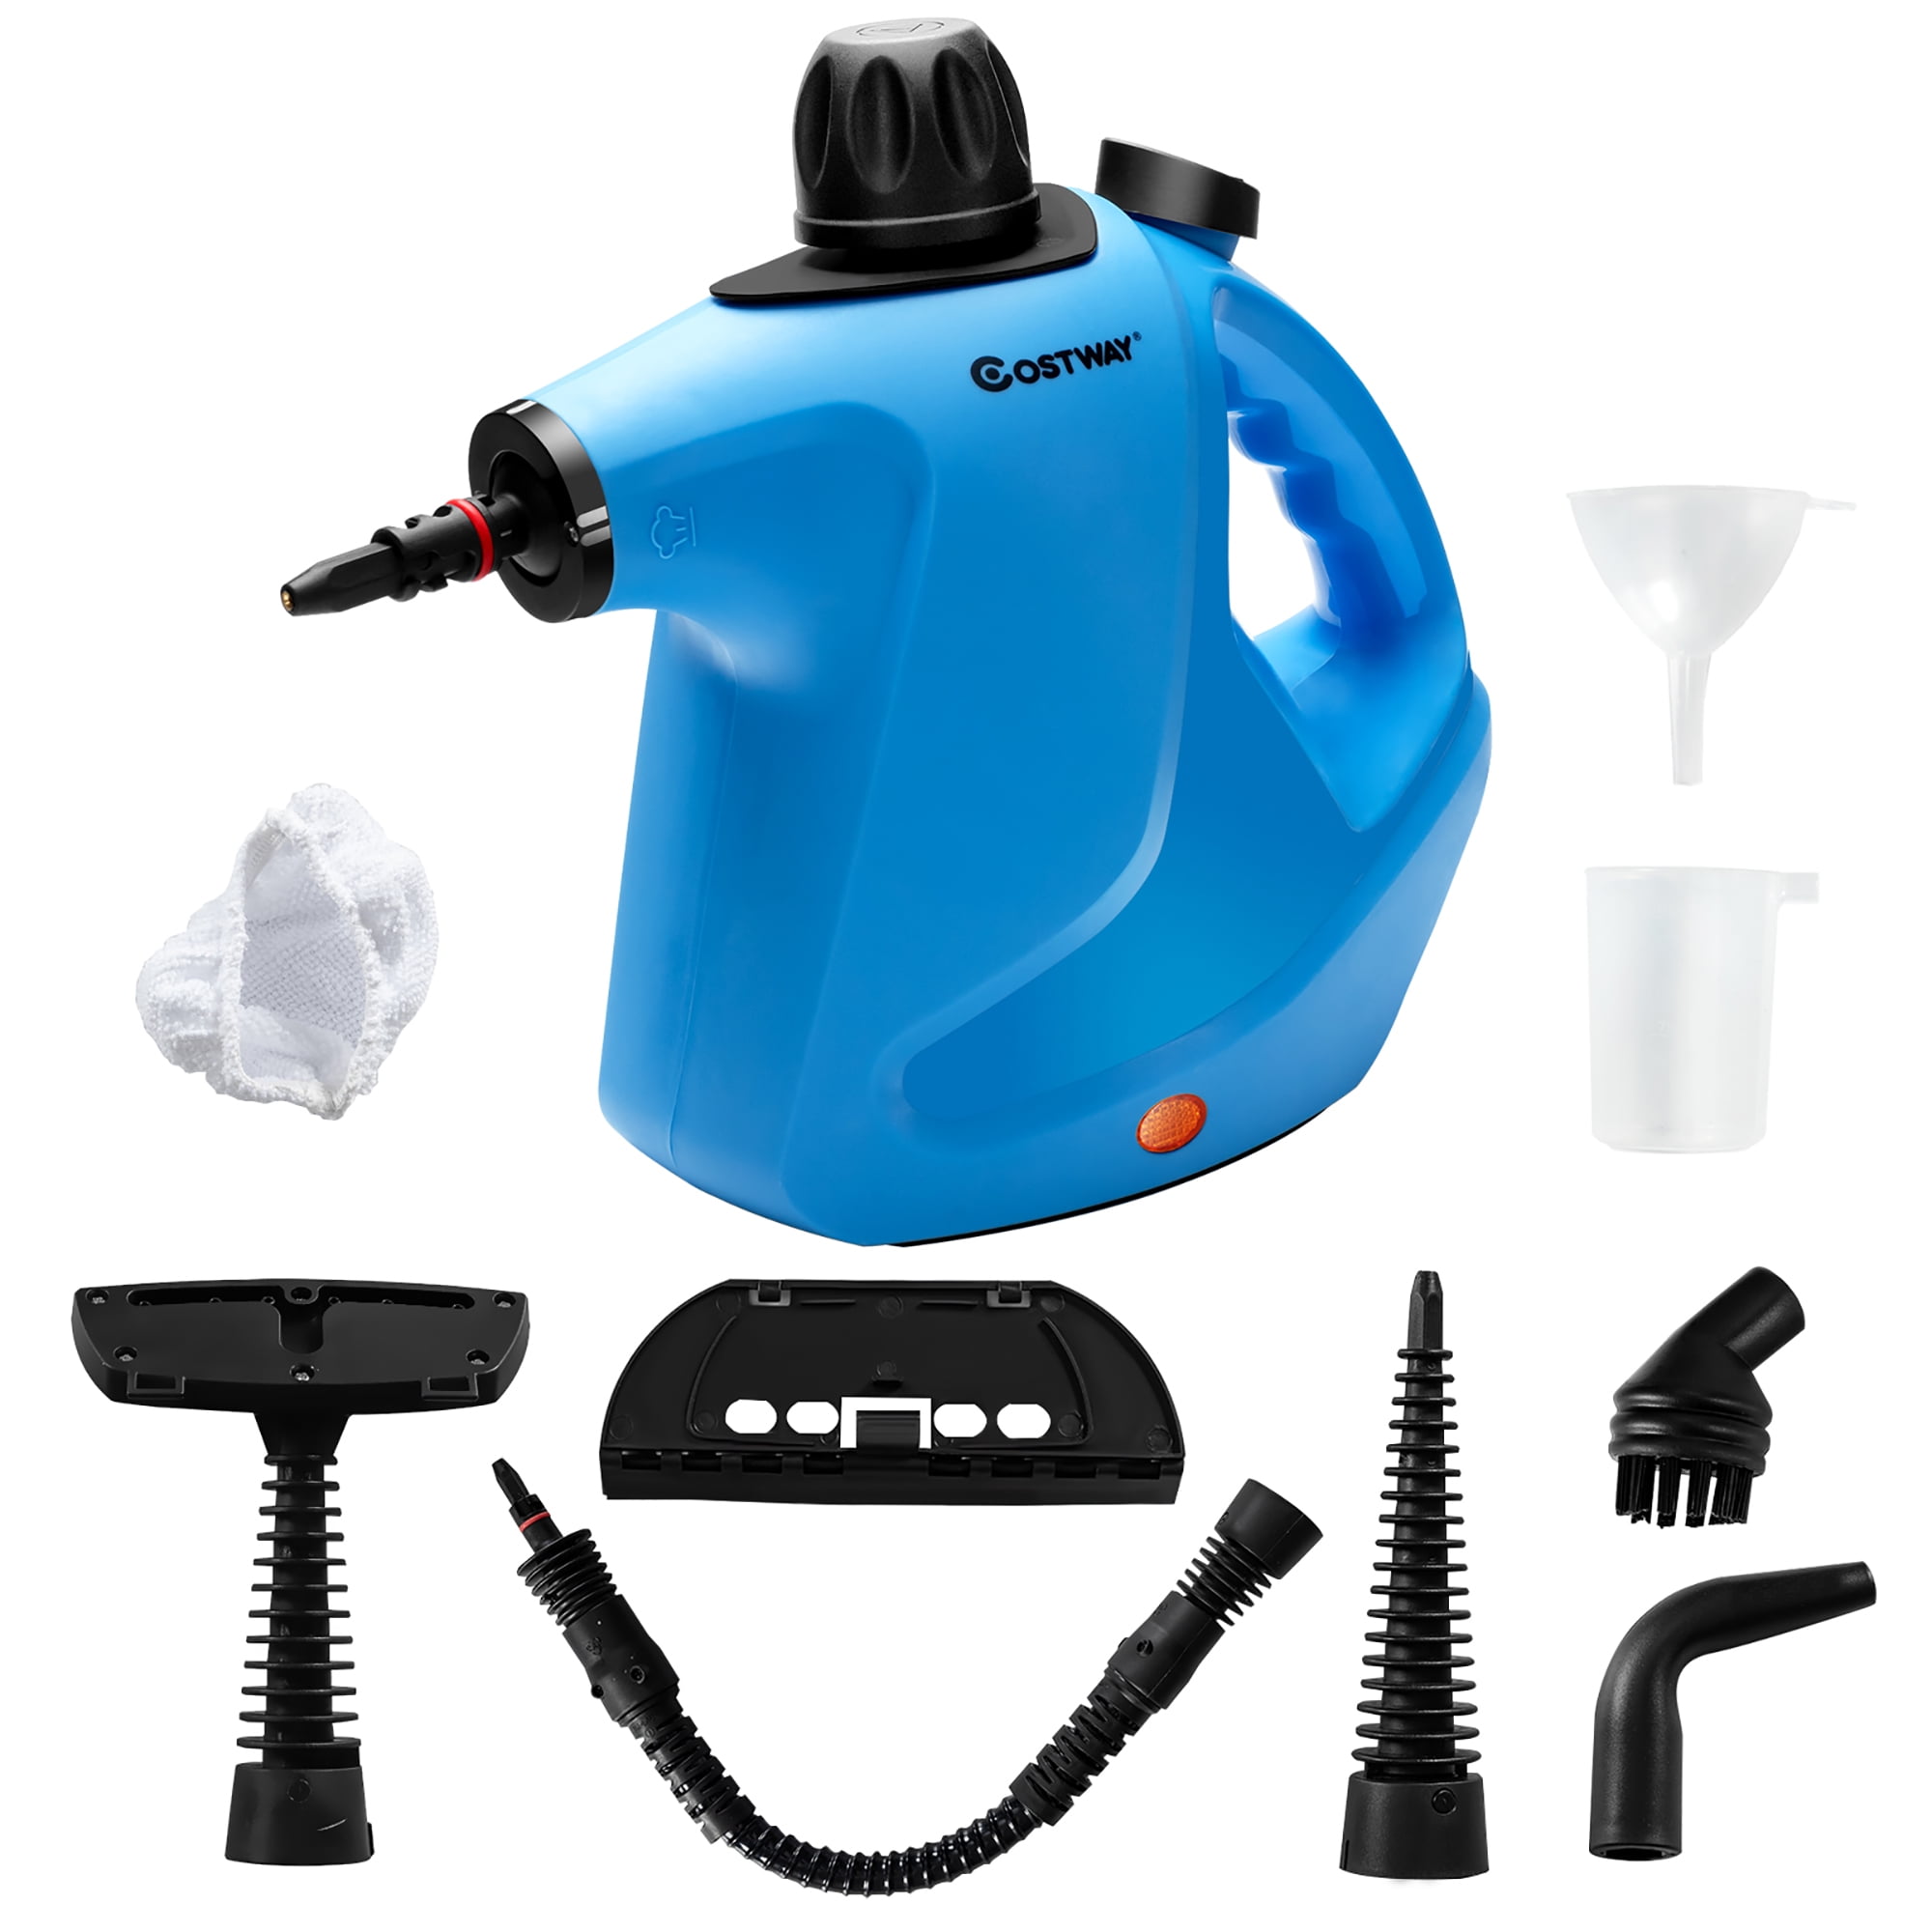 New Portable Steamer Household Steam Cleaner Multi-functional with 9 Attachments 